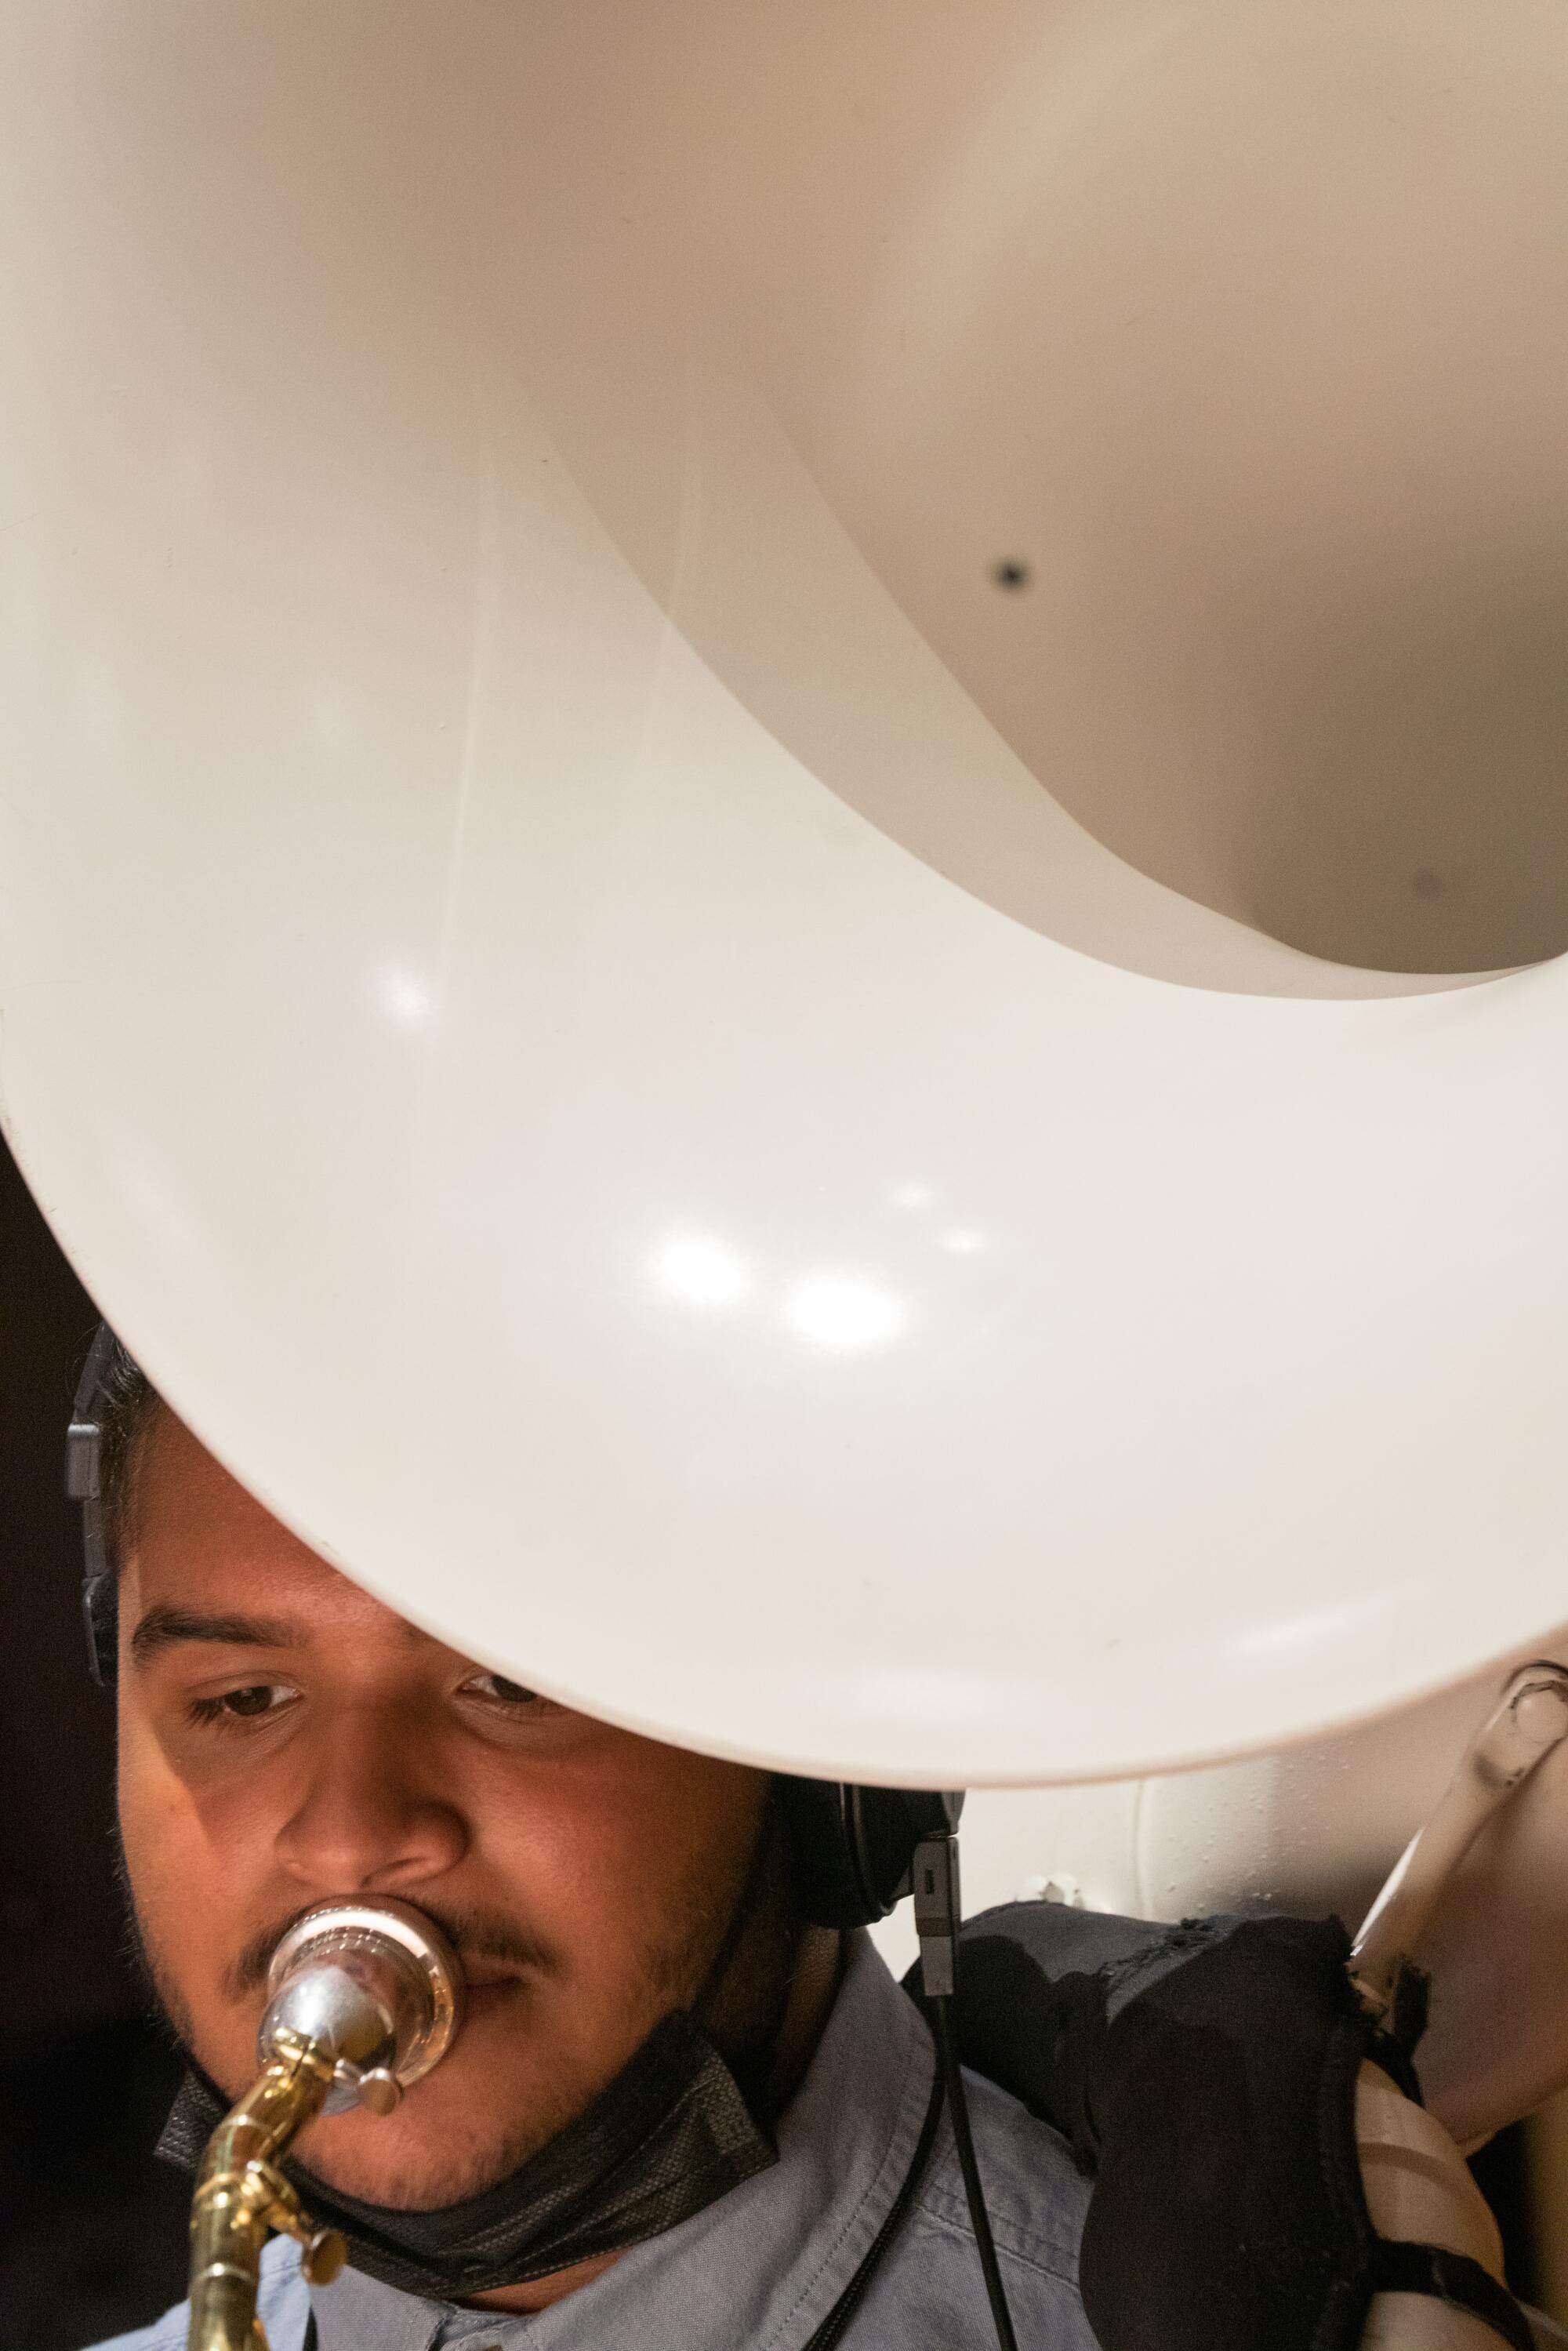 A student plays their horn instrument.